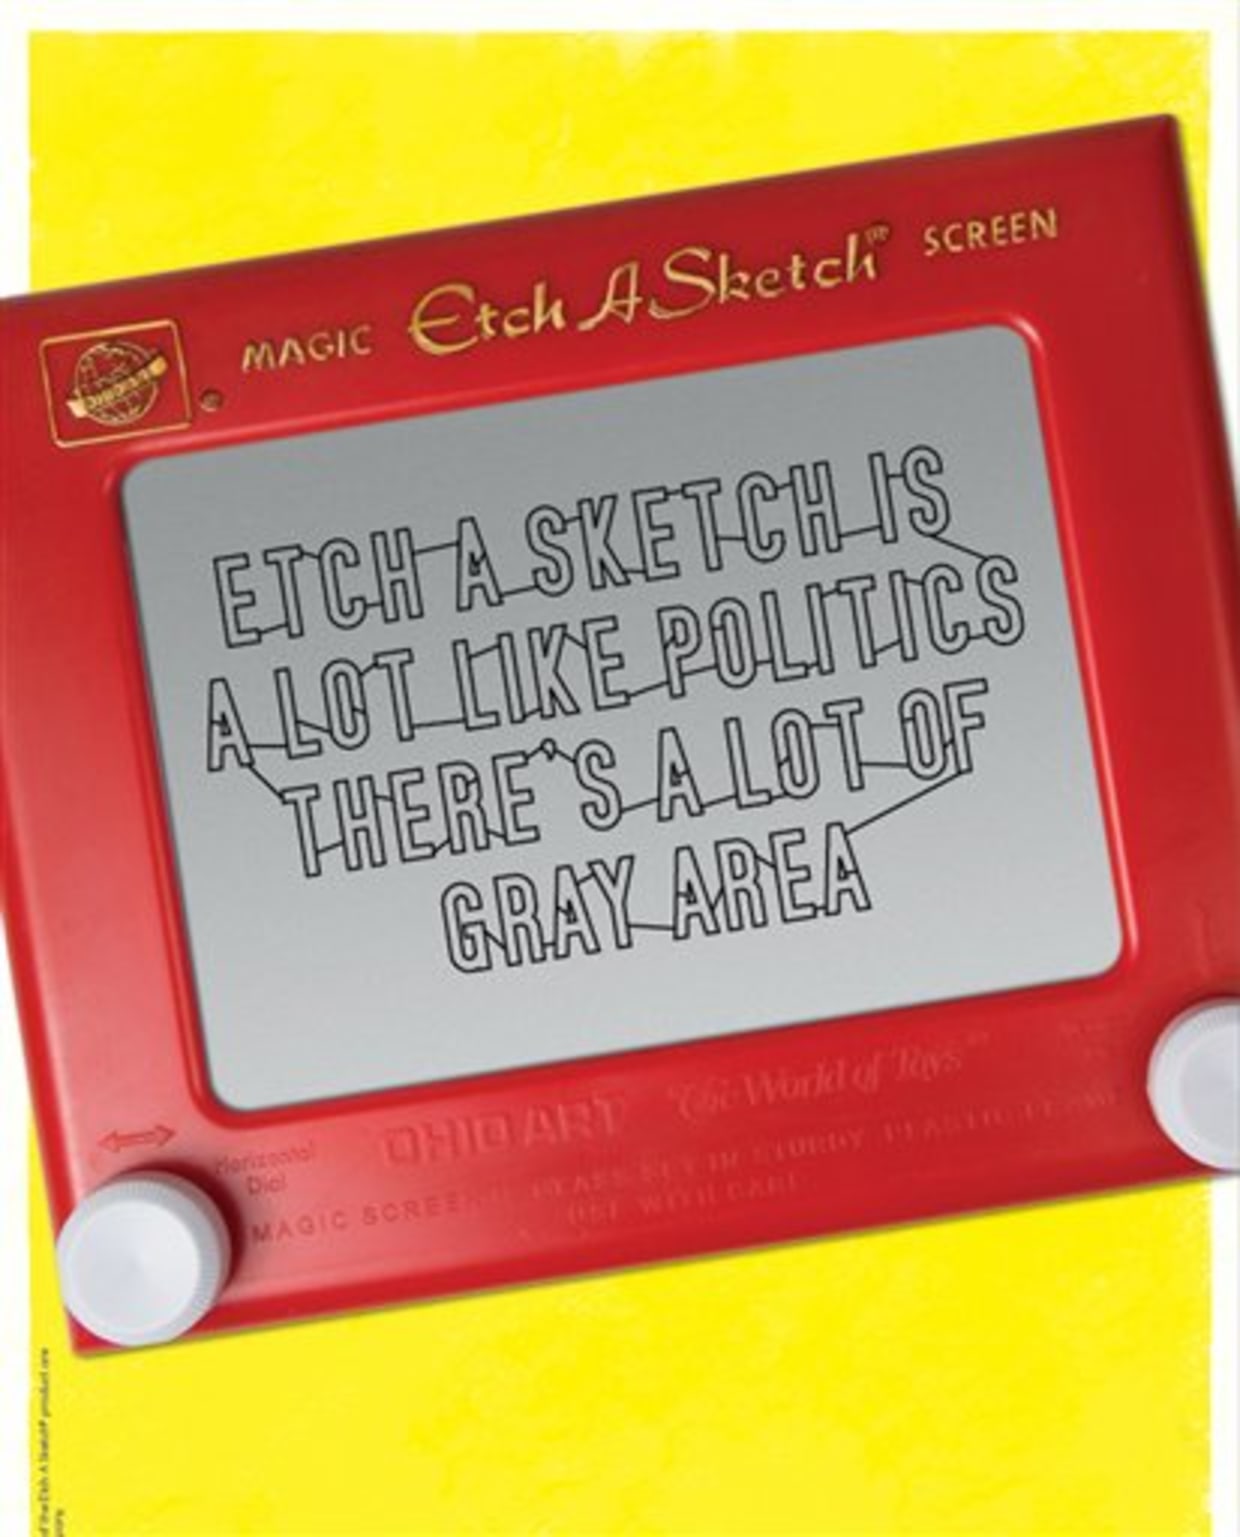 Wascana Centre - To celebrate national Etch-a-Sketch Day we thought we  would share this image from talented That's So Etch . That's talent!  #discoverwc #seeyqr #etchasketch